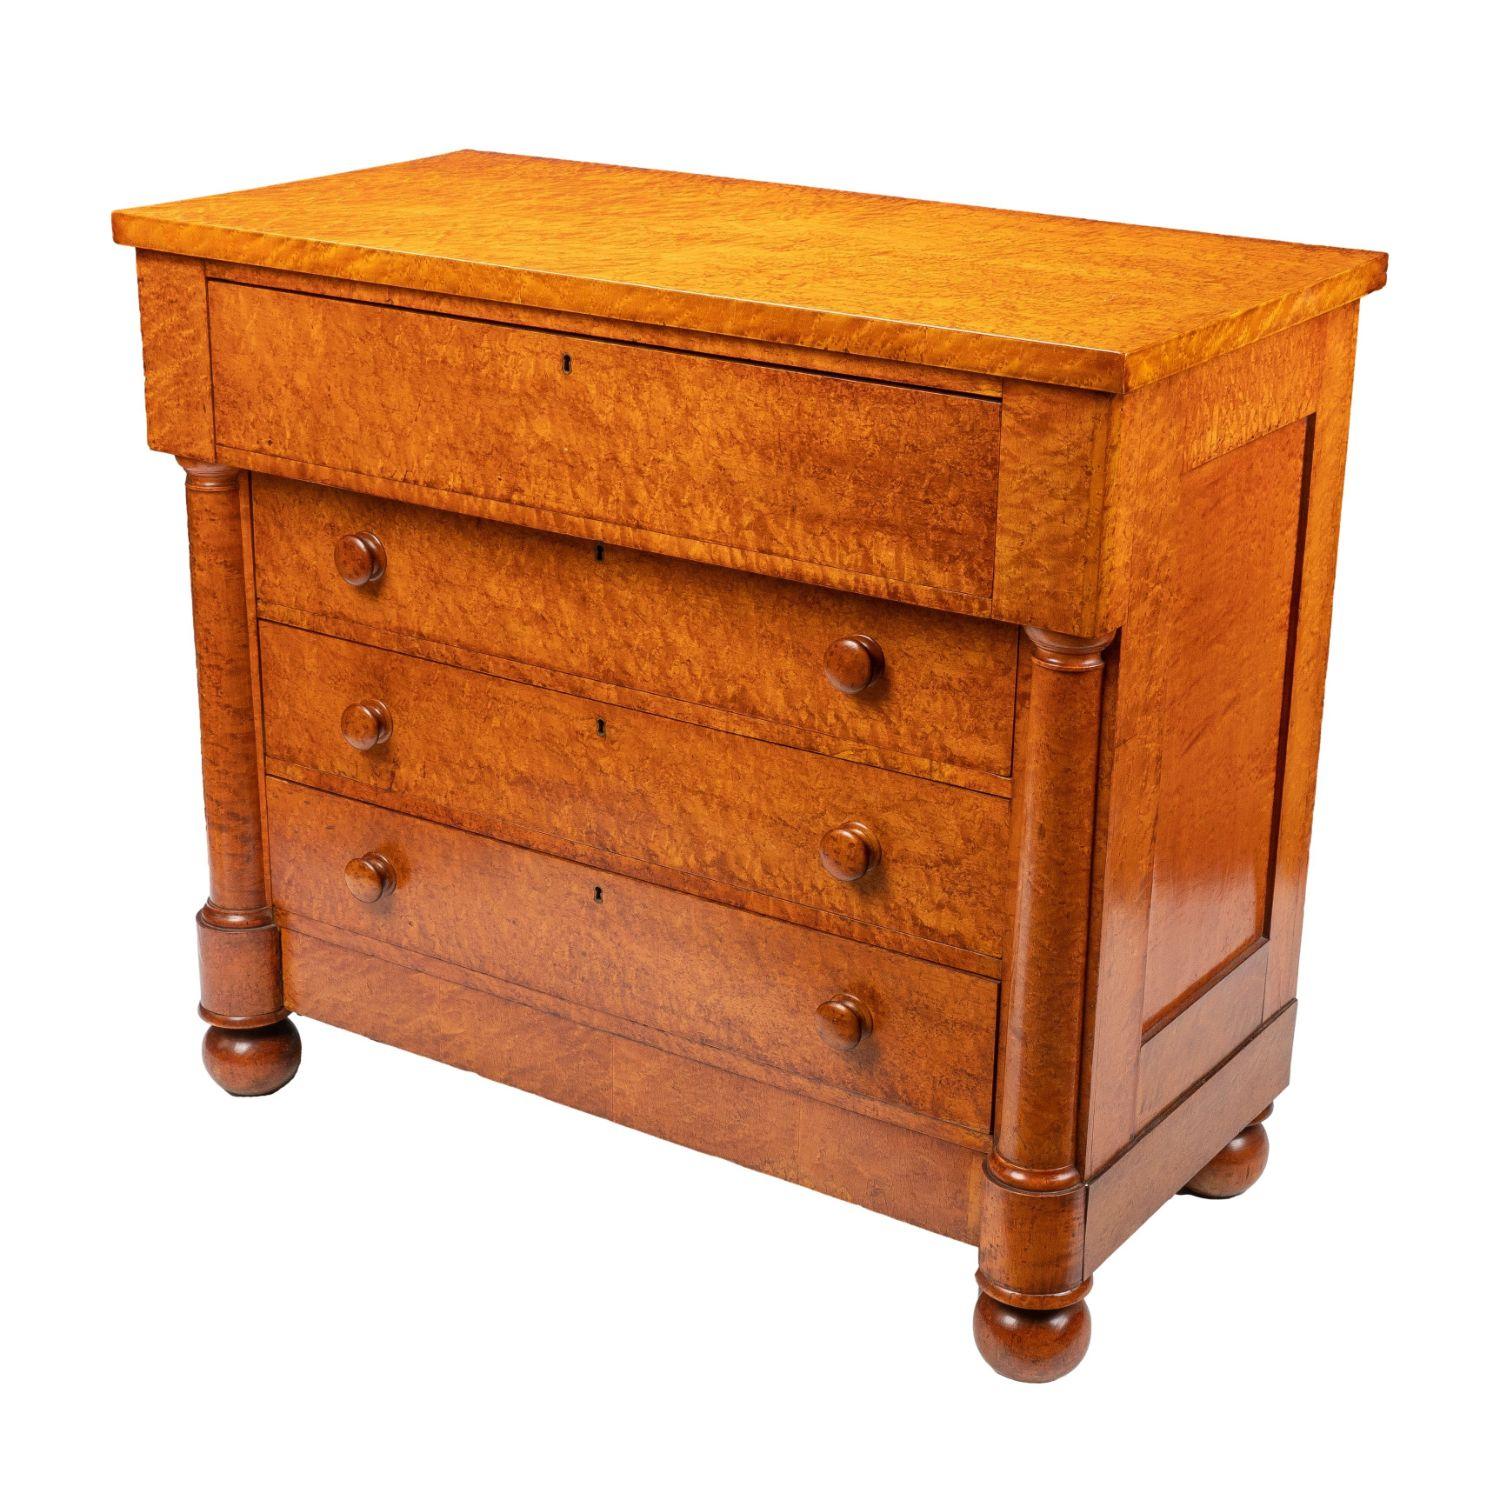 American Neoclassic four drawer chest in the French Restoration taste. The case employs both solid and veneered bird’s-eye maple in choice selection of overall pattern. The top is matched bird’s maple over a full width blind top drawer projecting